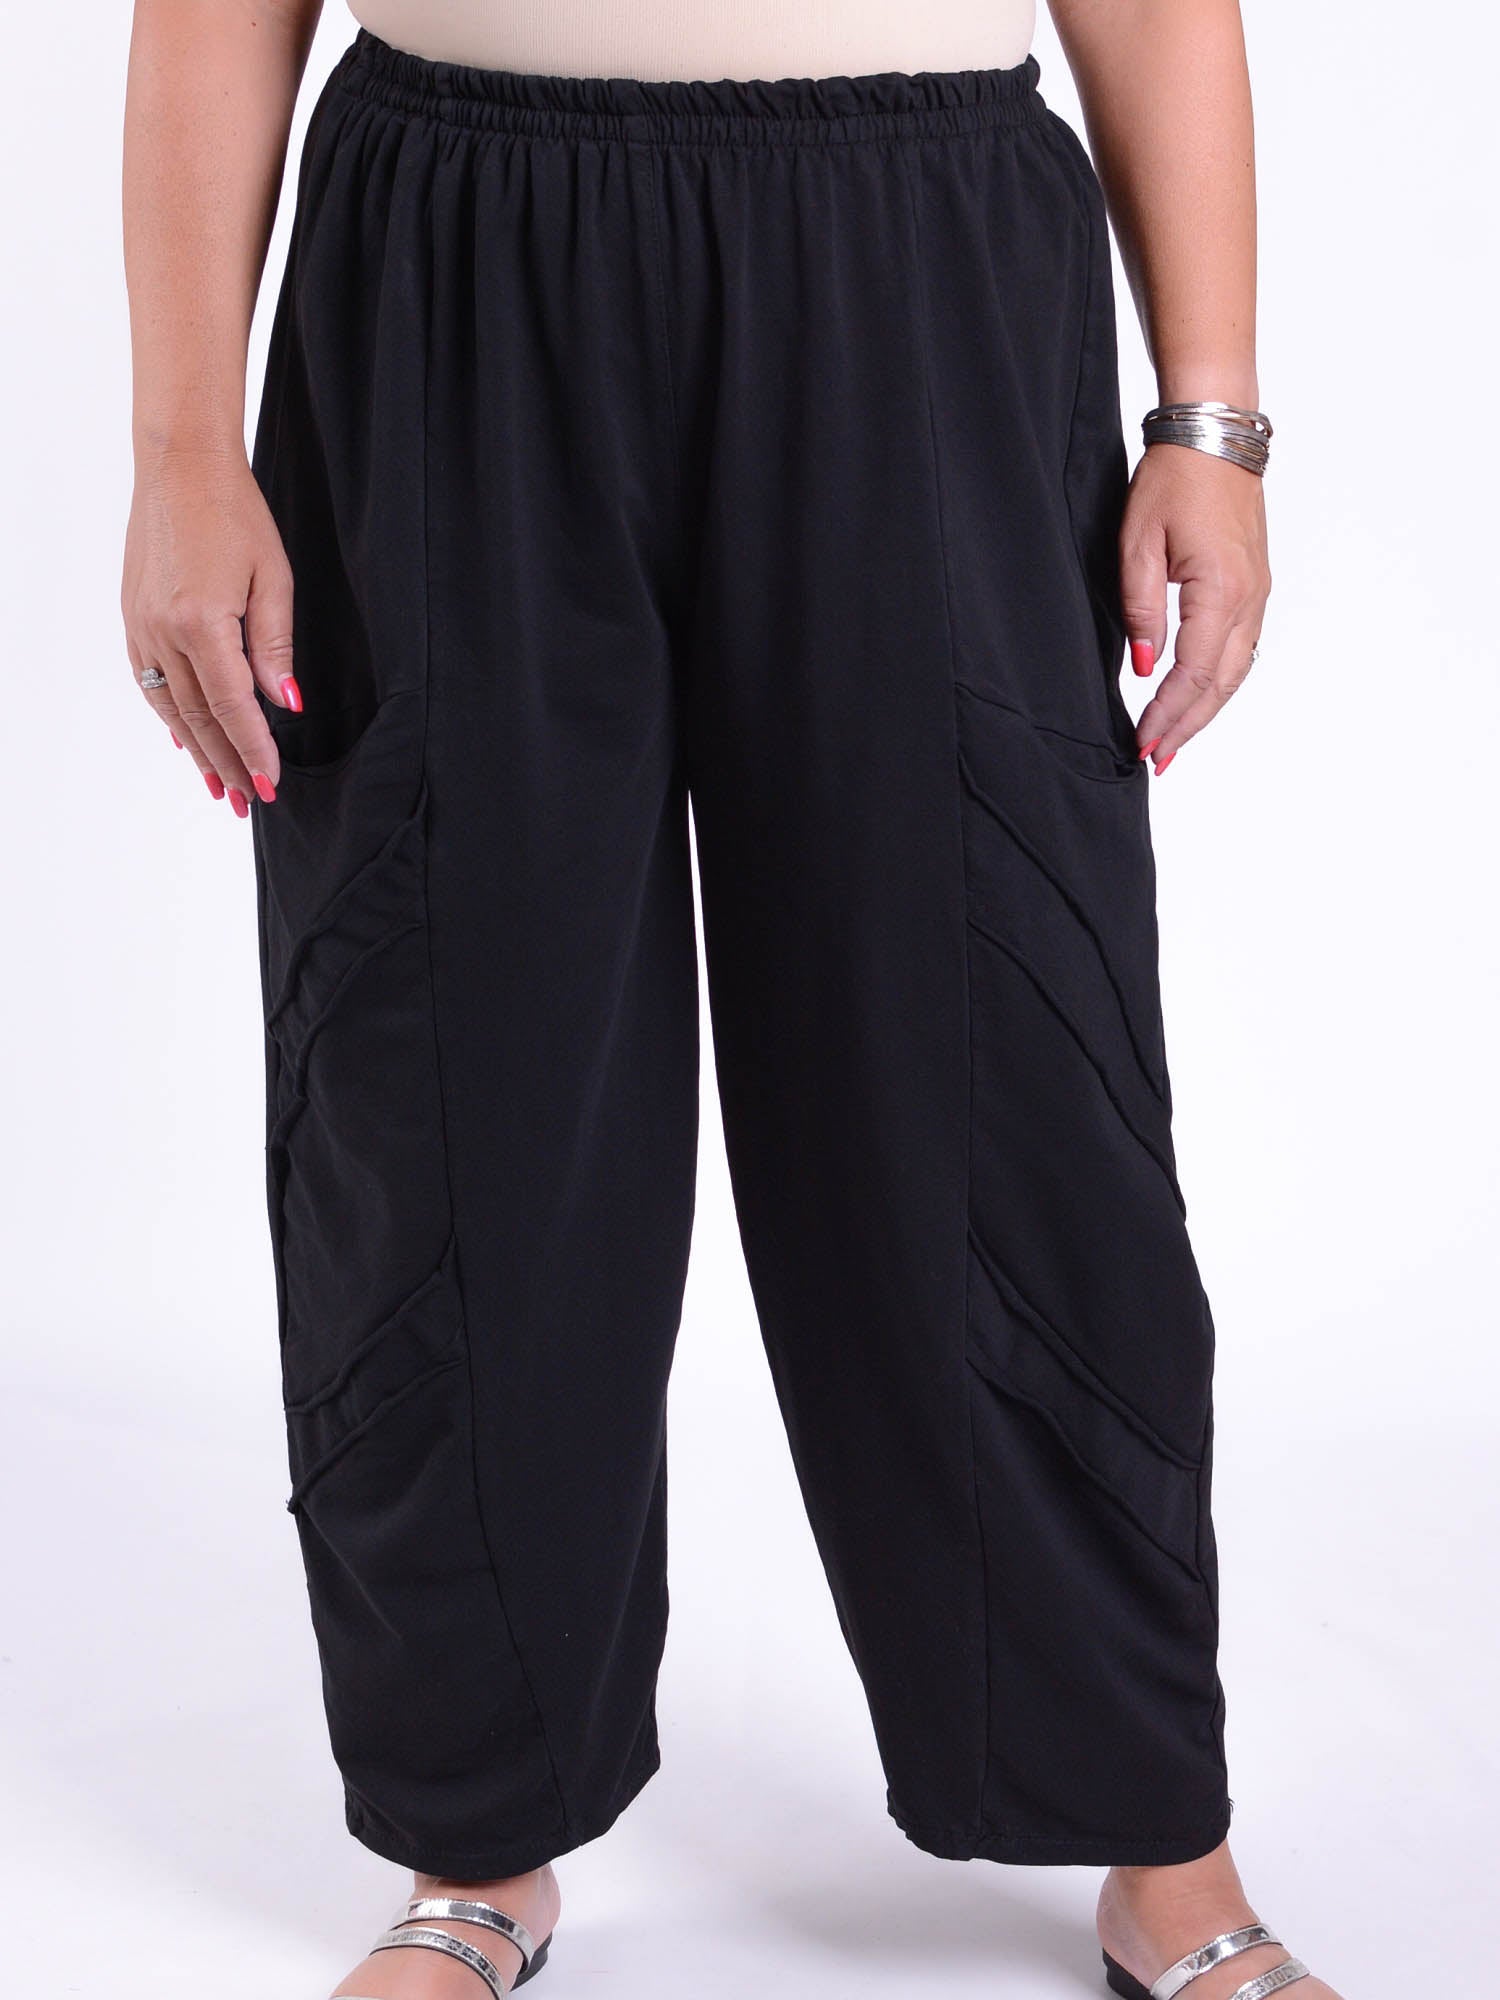 Lagenlook Heavy Cotton Trousers - 11273, Trousers, Pure Plus Clothing, Lagenlook Clothing, Plus Size Fashion, Over 50 Fashion